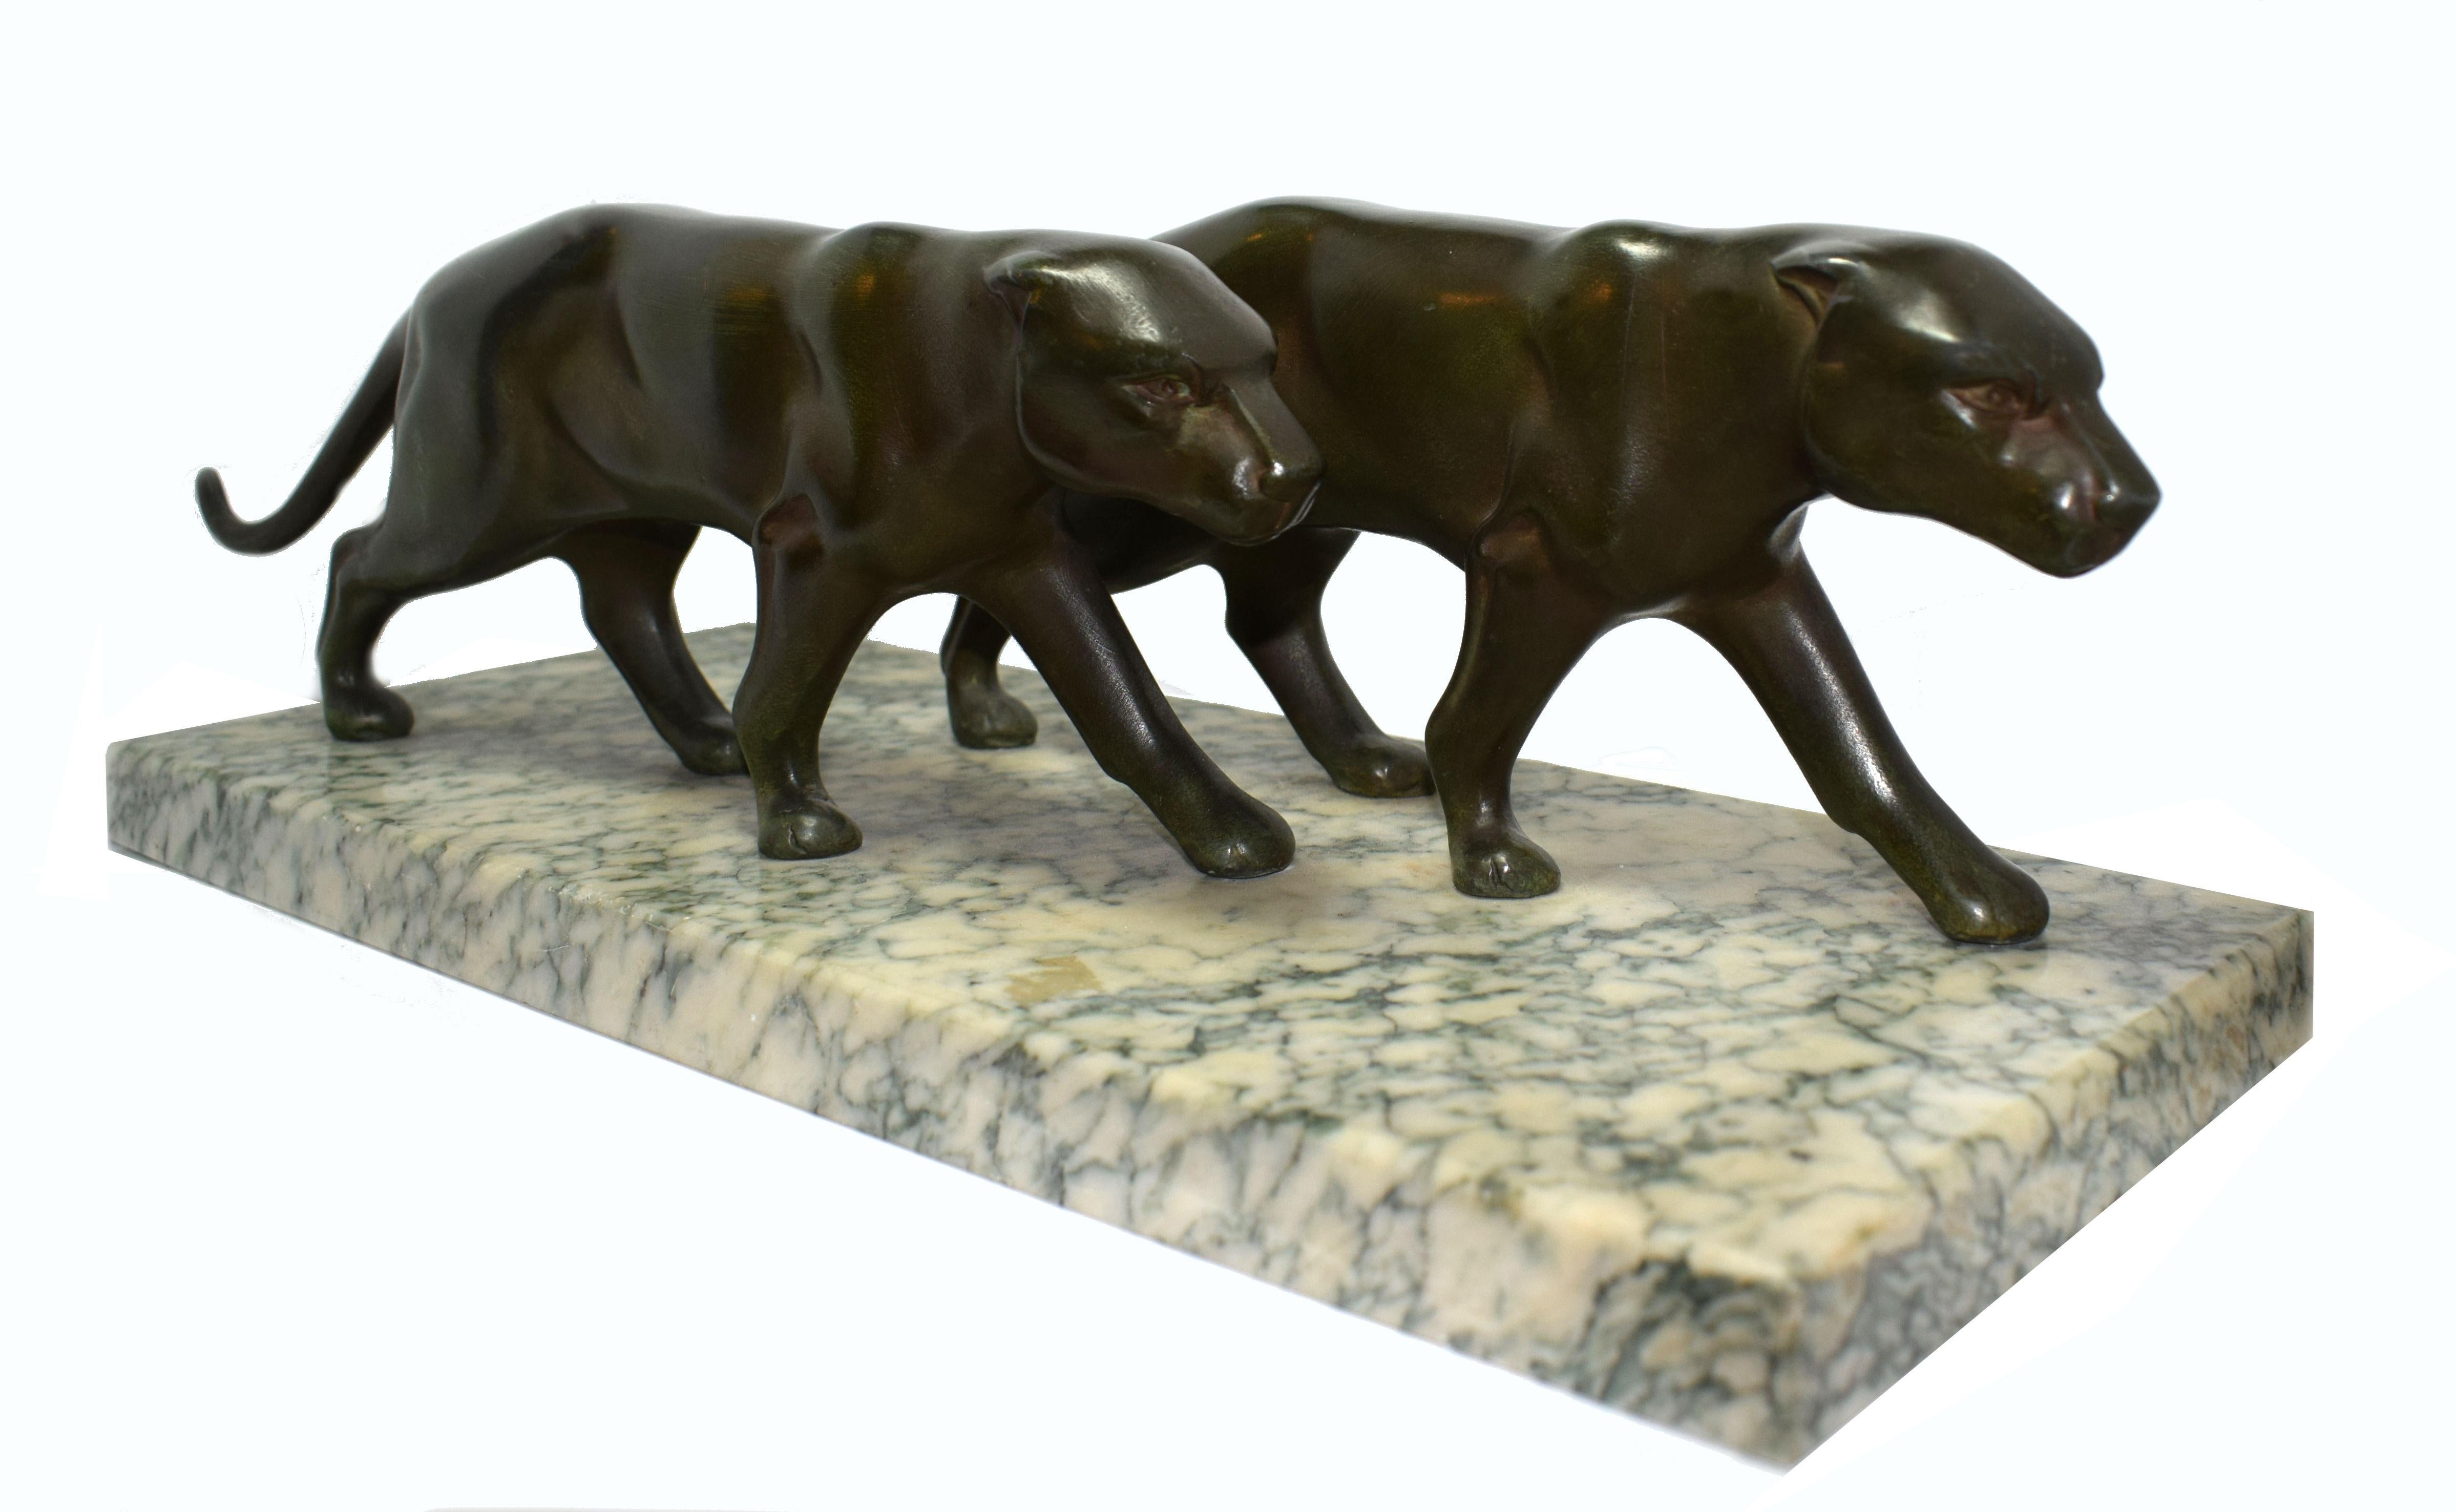 An impressive and large 1930s Art Deco pair of strolling panther figures on a mottled green and off white colour marble base. Wonderful patina and in great condition this figure shows real quality. Beautiful detailing, a real sense of muscle tones